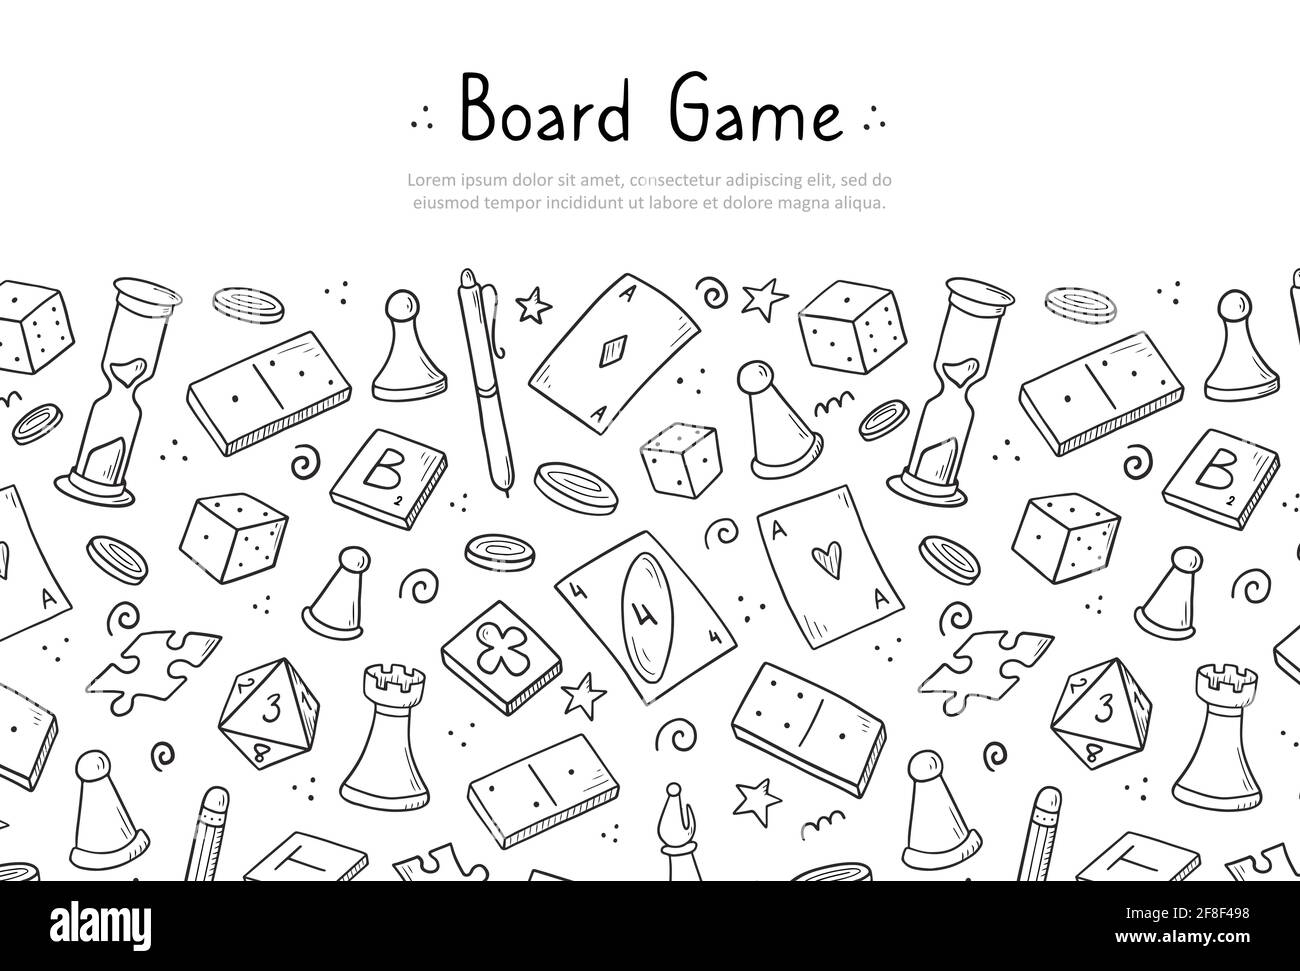 Hand drawn website banner template with of board game element. Doodle sketch style. Vector illustration for board game shop, store background, game competition banner, frame Stock Vector